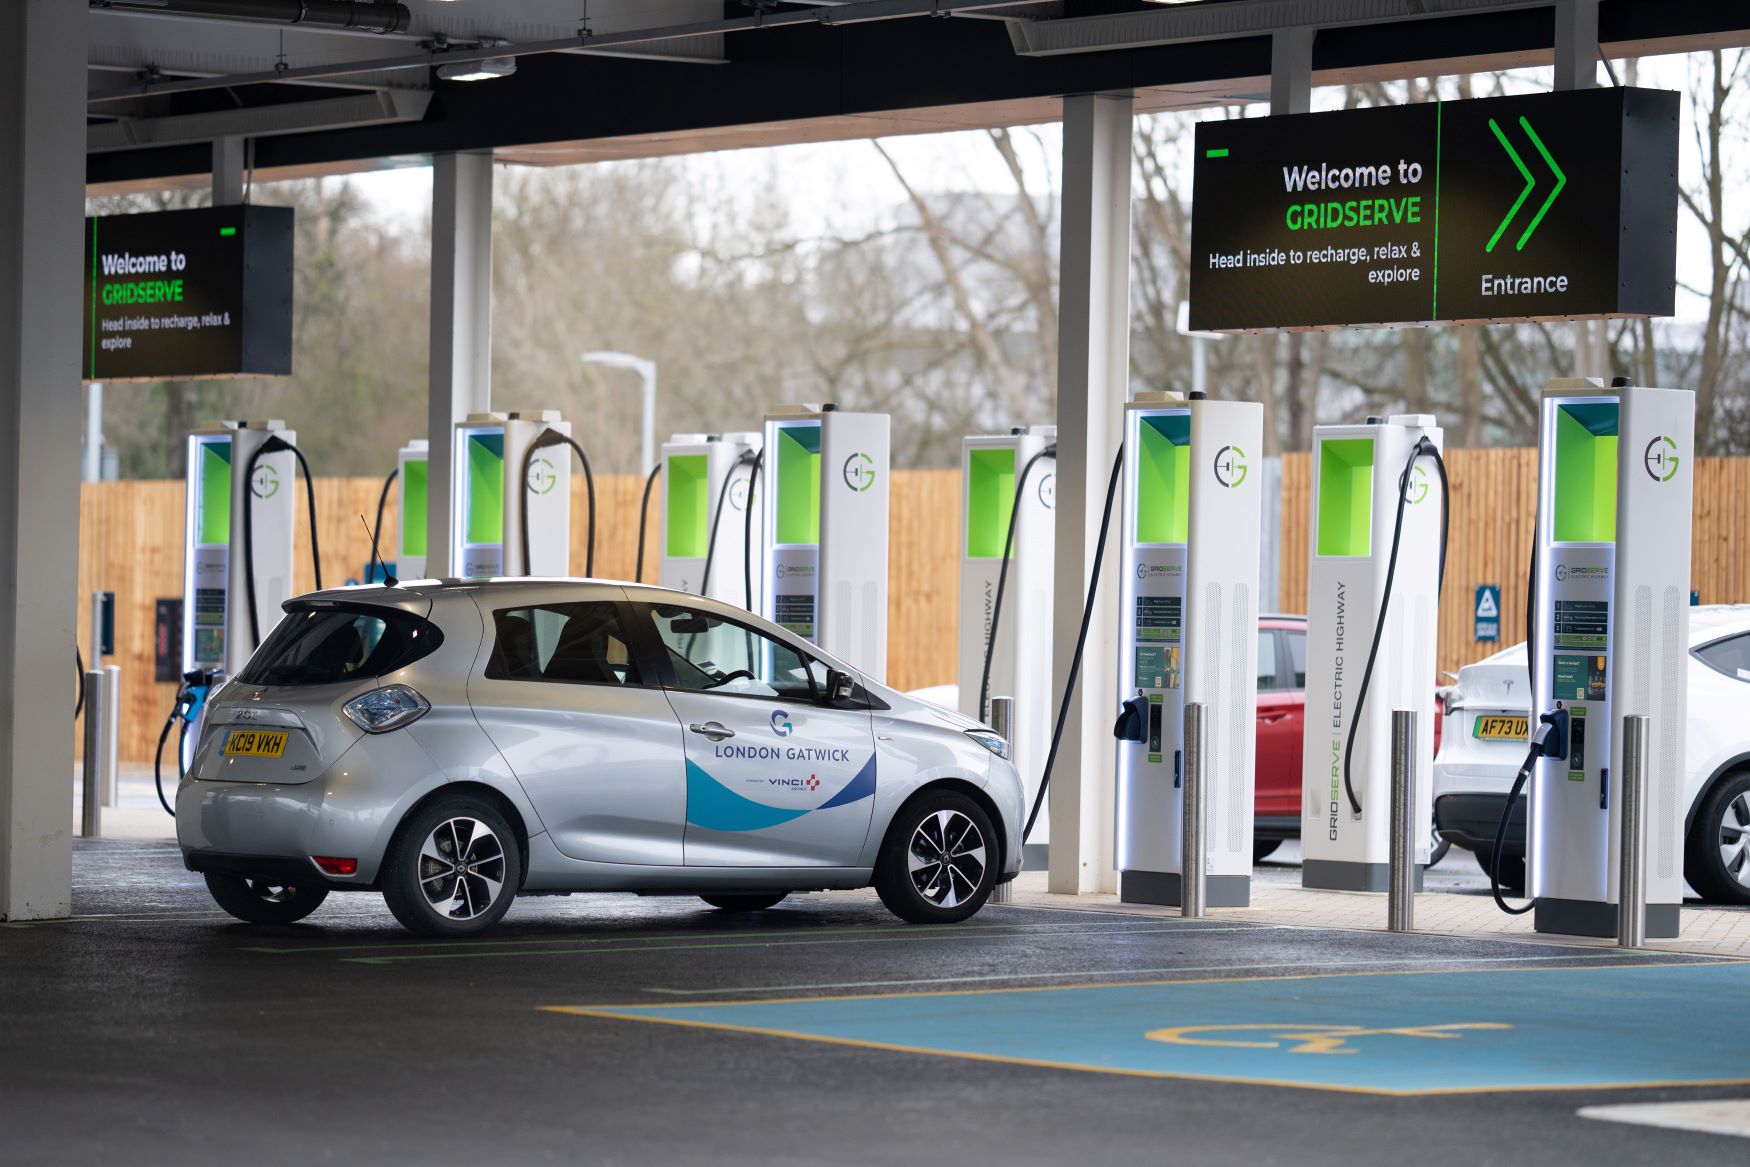 Europe’s first airport electric forecourt at London Gatwick